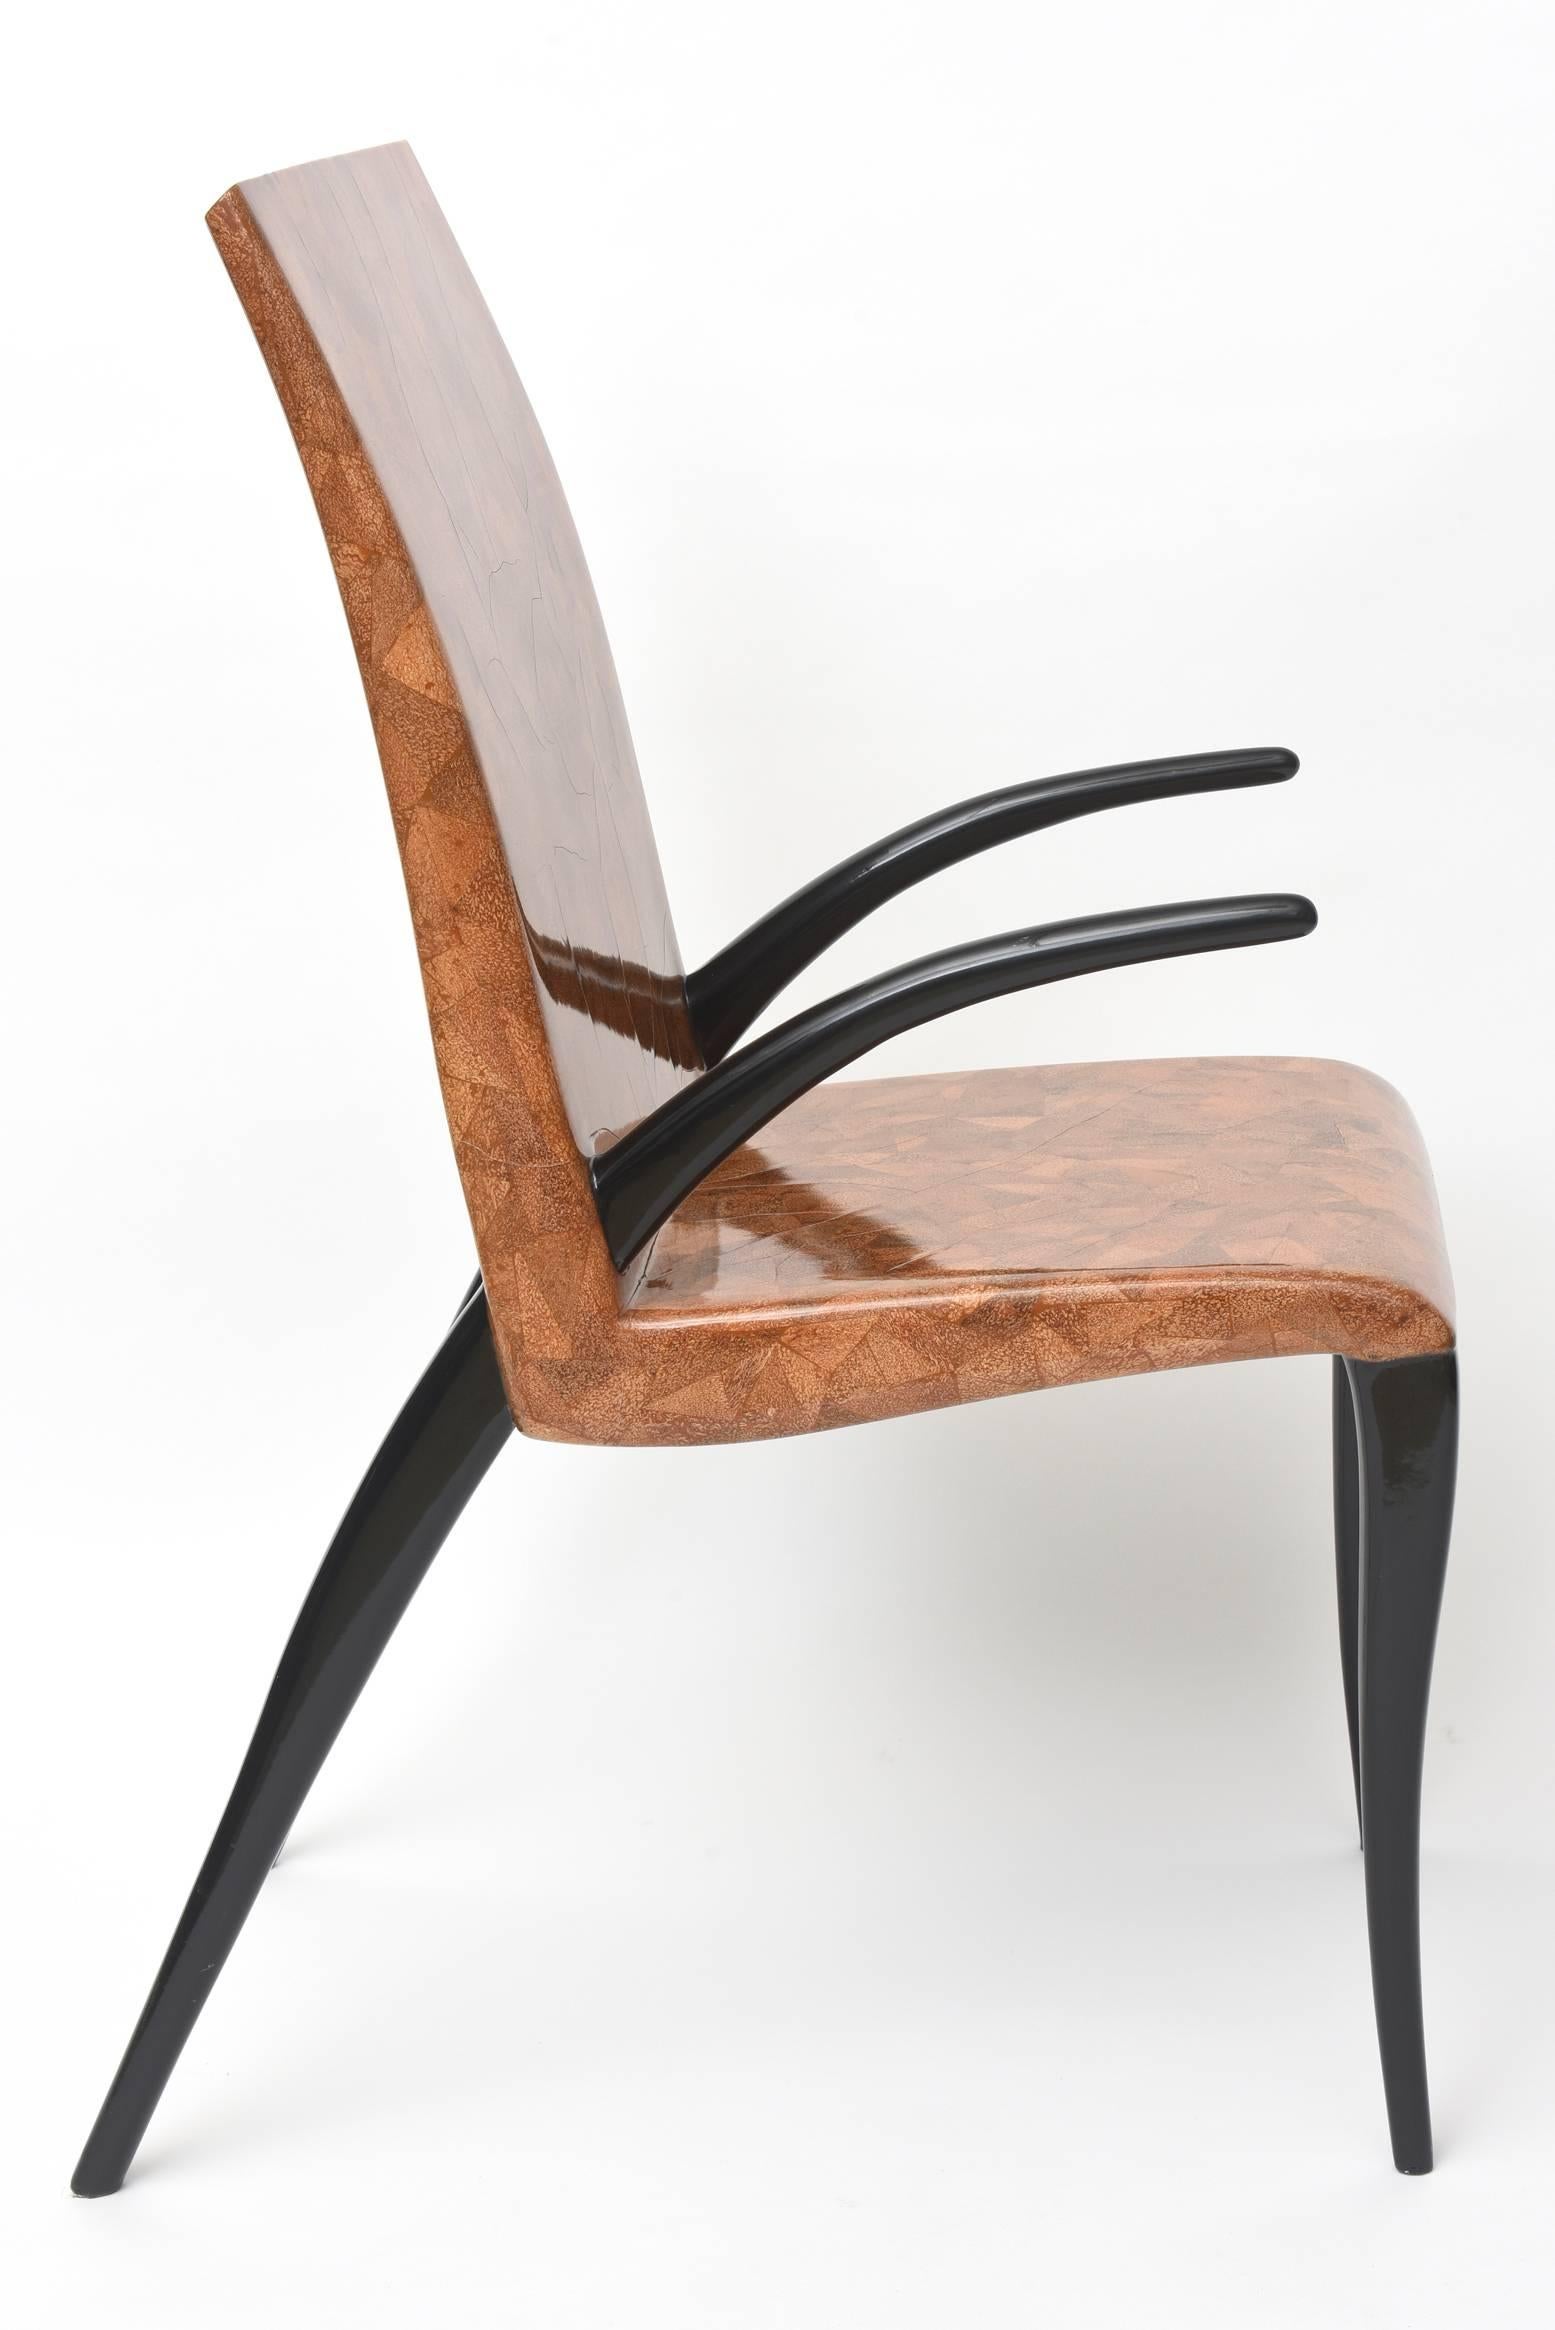 The back and seat of coconut and tobacco under resin, the arms and legs of ebony wood, metal label R & Y Augousti- Paris.